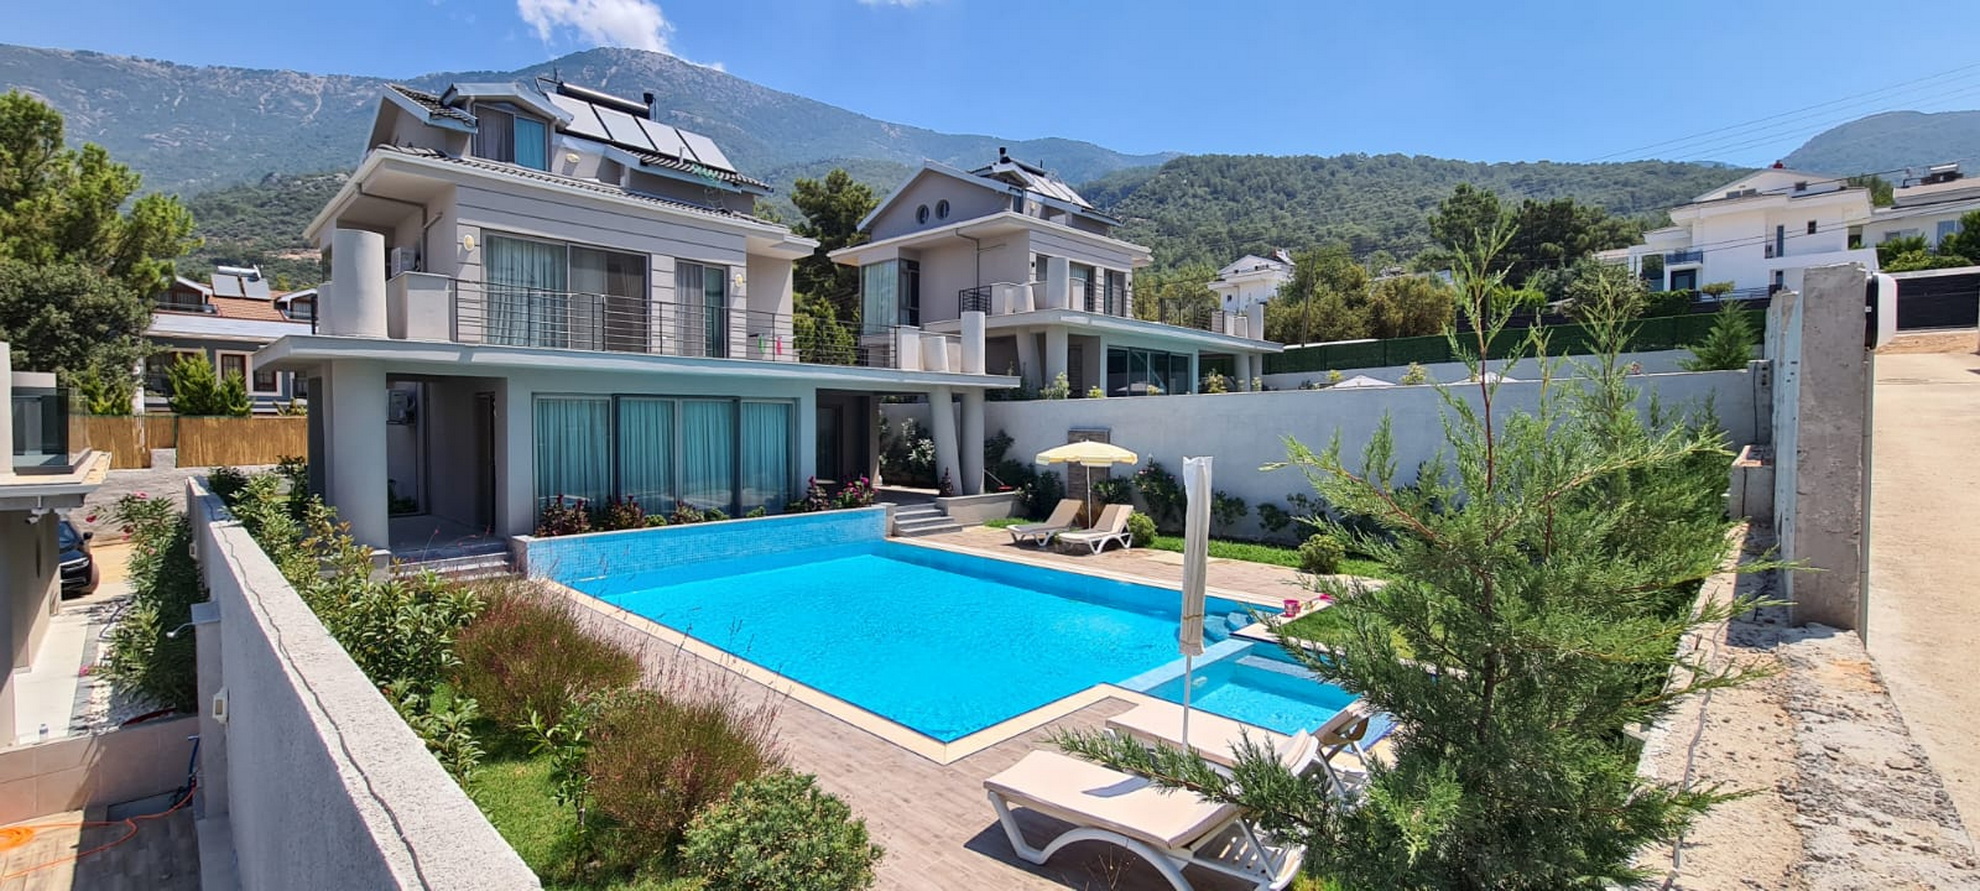 Luxury 3 Bedroom Villa with Private Pool & Landscaped Garden in Ovacik